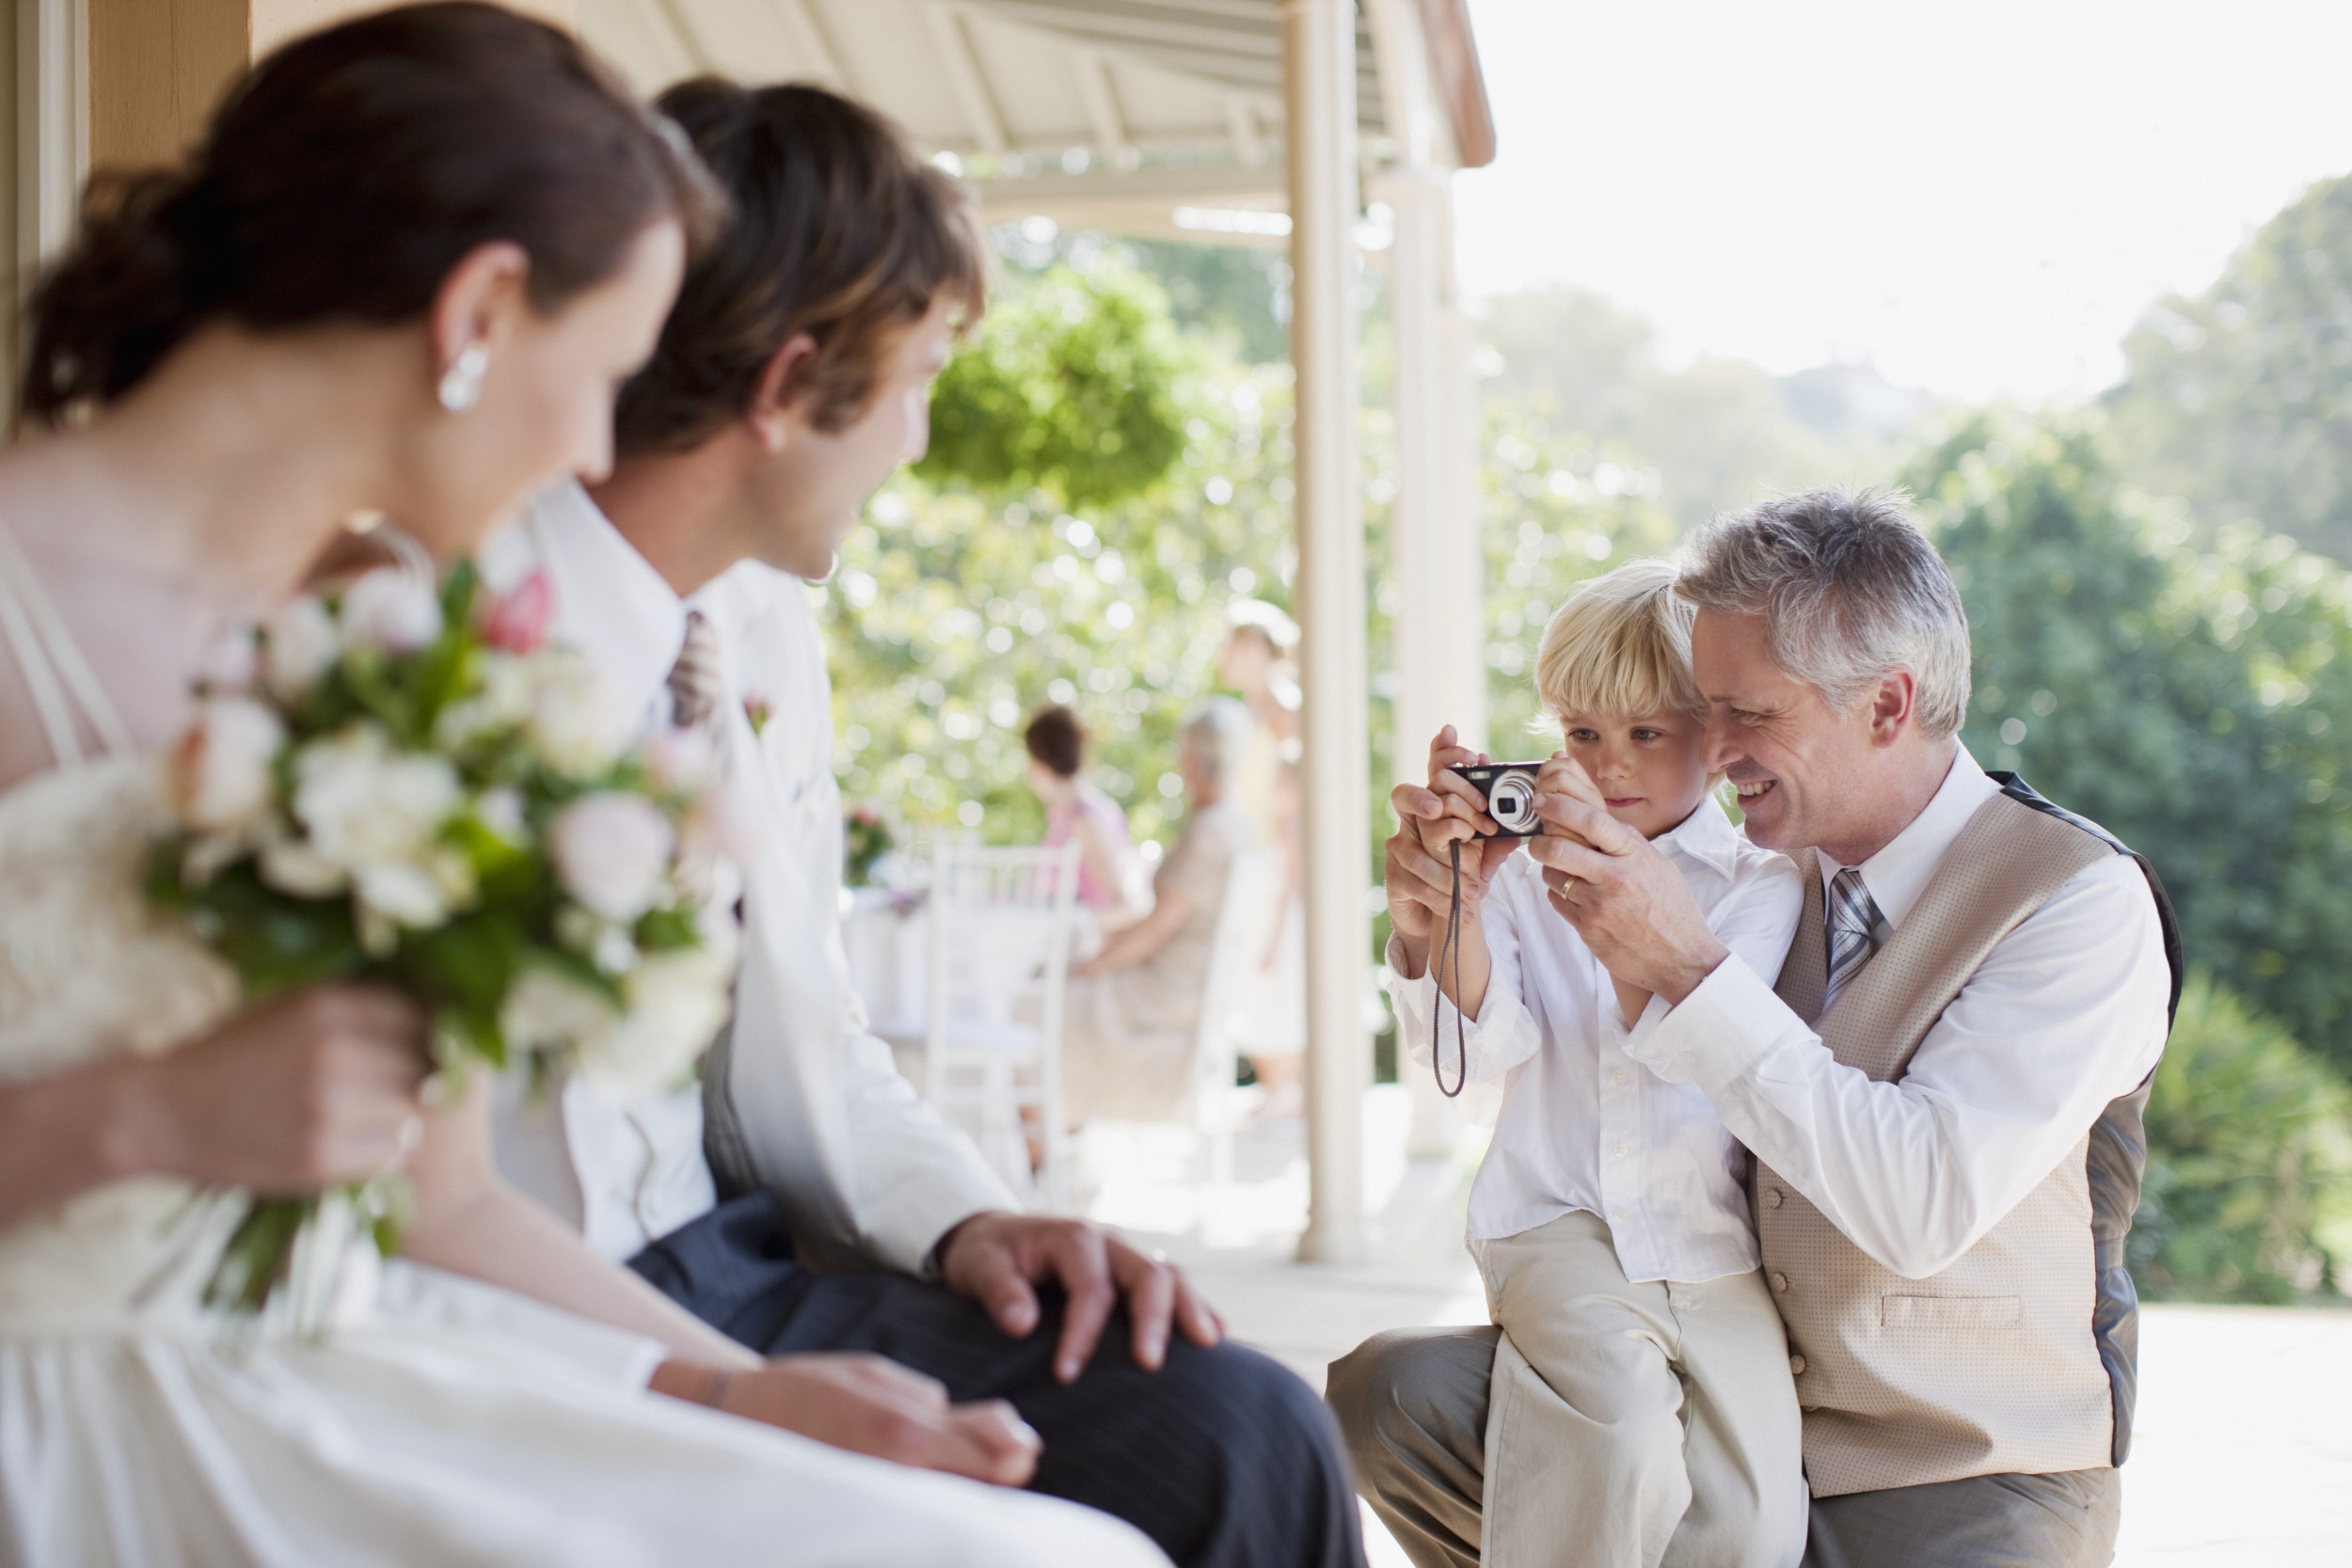 Bride Backed for Uninviting Friend Refusing To Obey Child-Free Wedding Rule